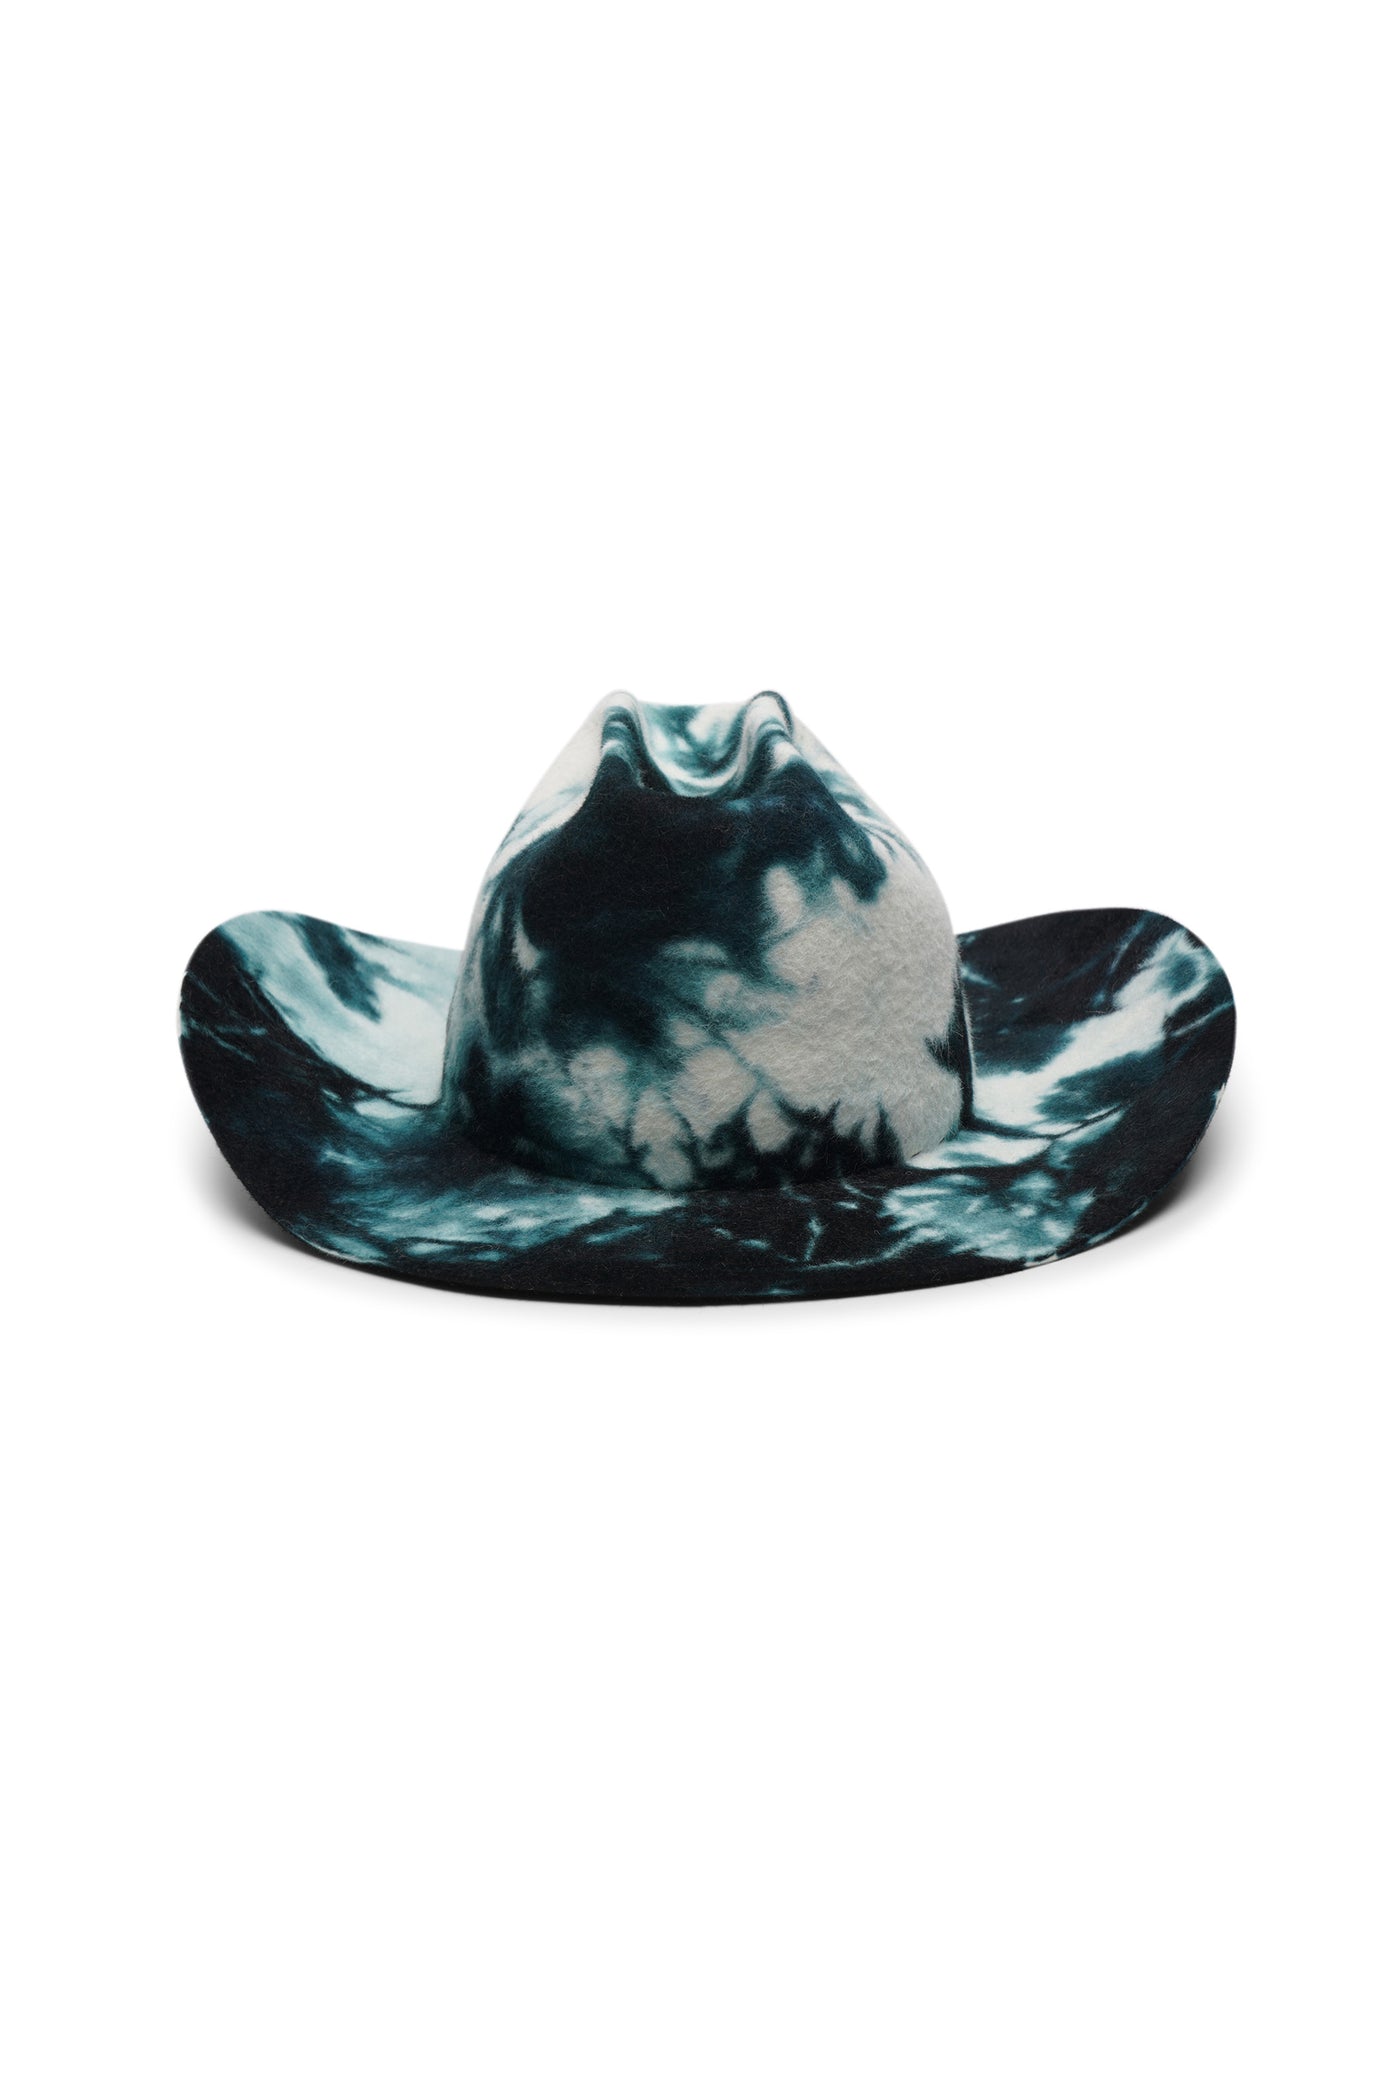 White/green tie dye cowboy in 100% velour fur felt hat with a wide brim and center crease. Unisex hat style in various sizes and colors. We ship worldwide. Shop now. Each SoonNoon hat is handmade with unique character in Stockholm, Sweden.